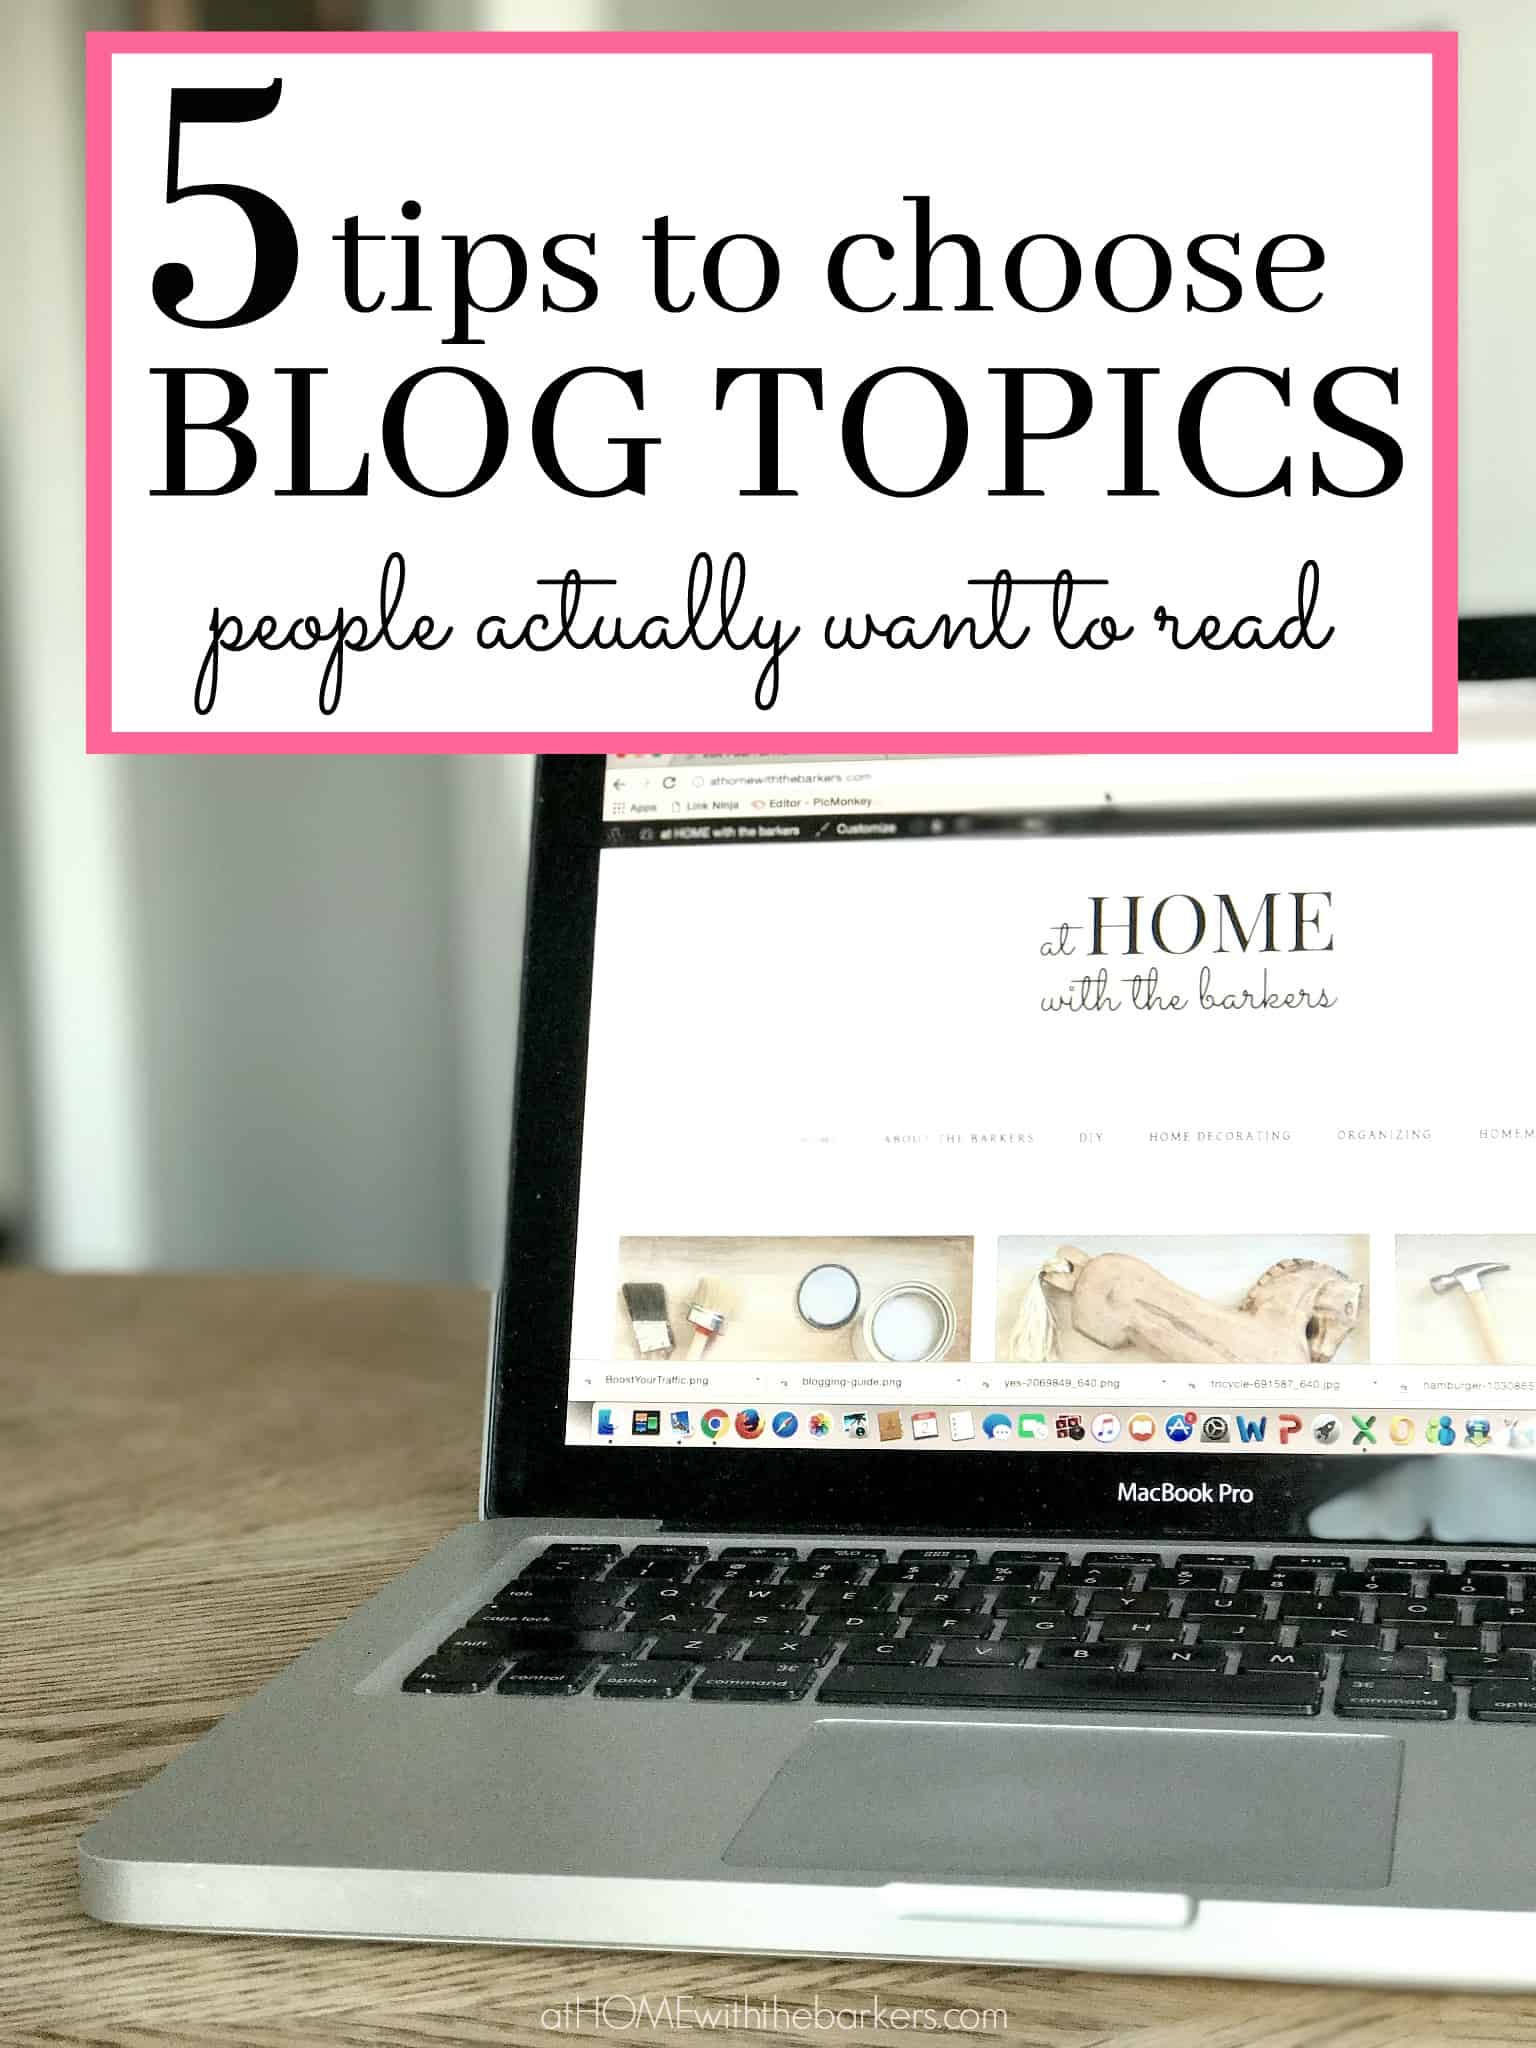 5-tips-to-choose-blog-topics-people-actually-want-to-read-at-home